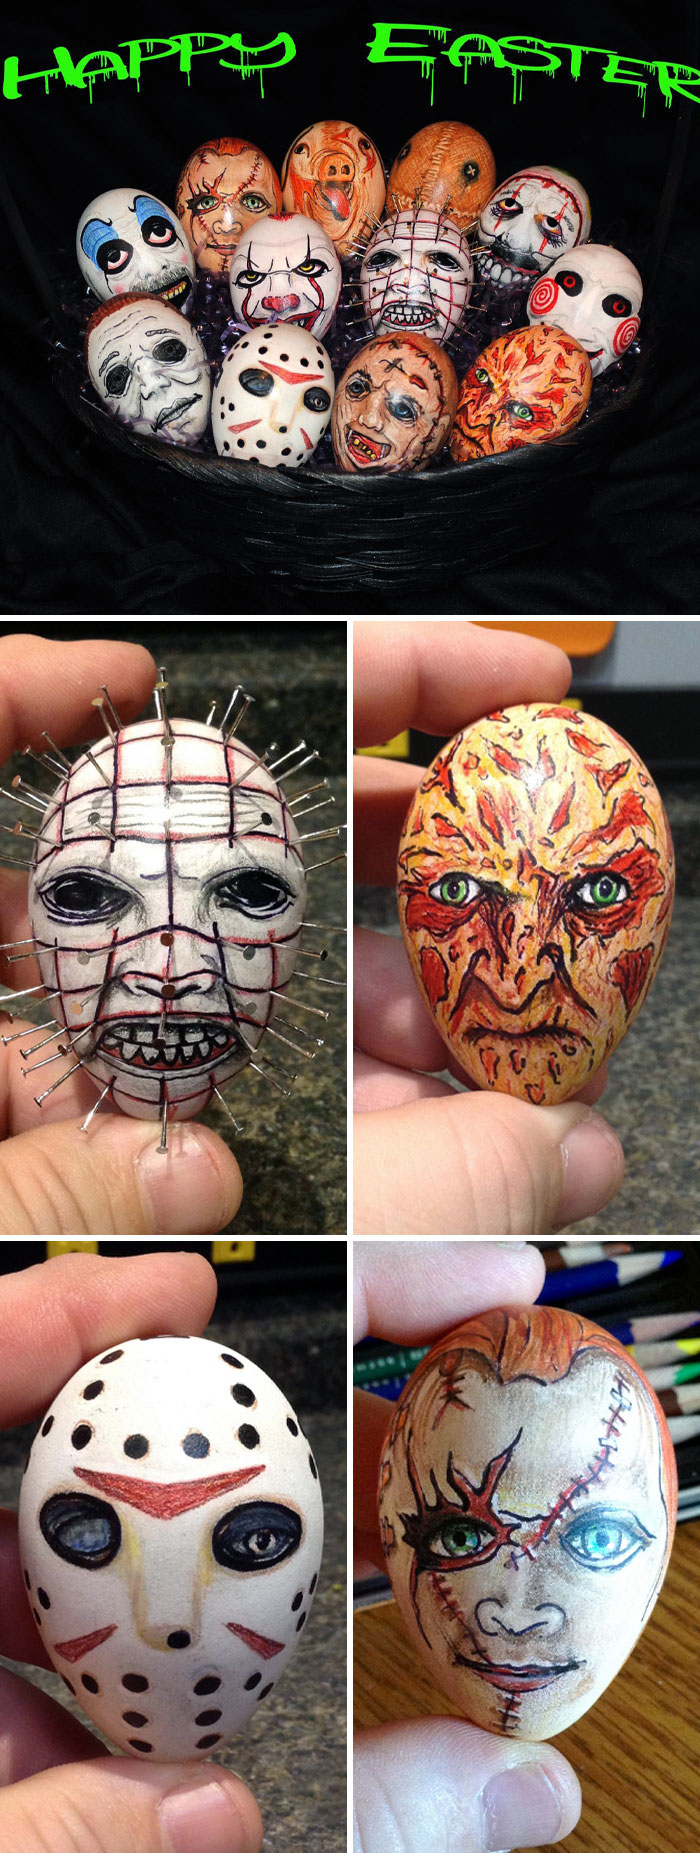 My Horror-Themed Easter Egg Collection. Each Egg Was Down With Colored Pencils, Markers, And Paint. Each Year My Collection Grows